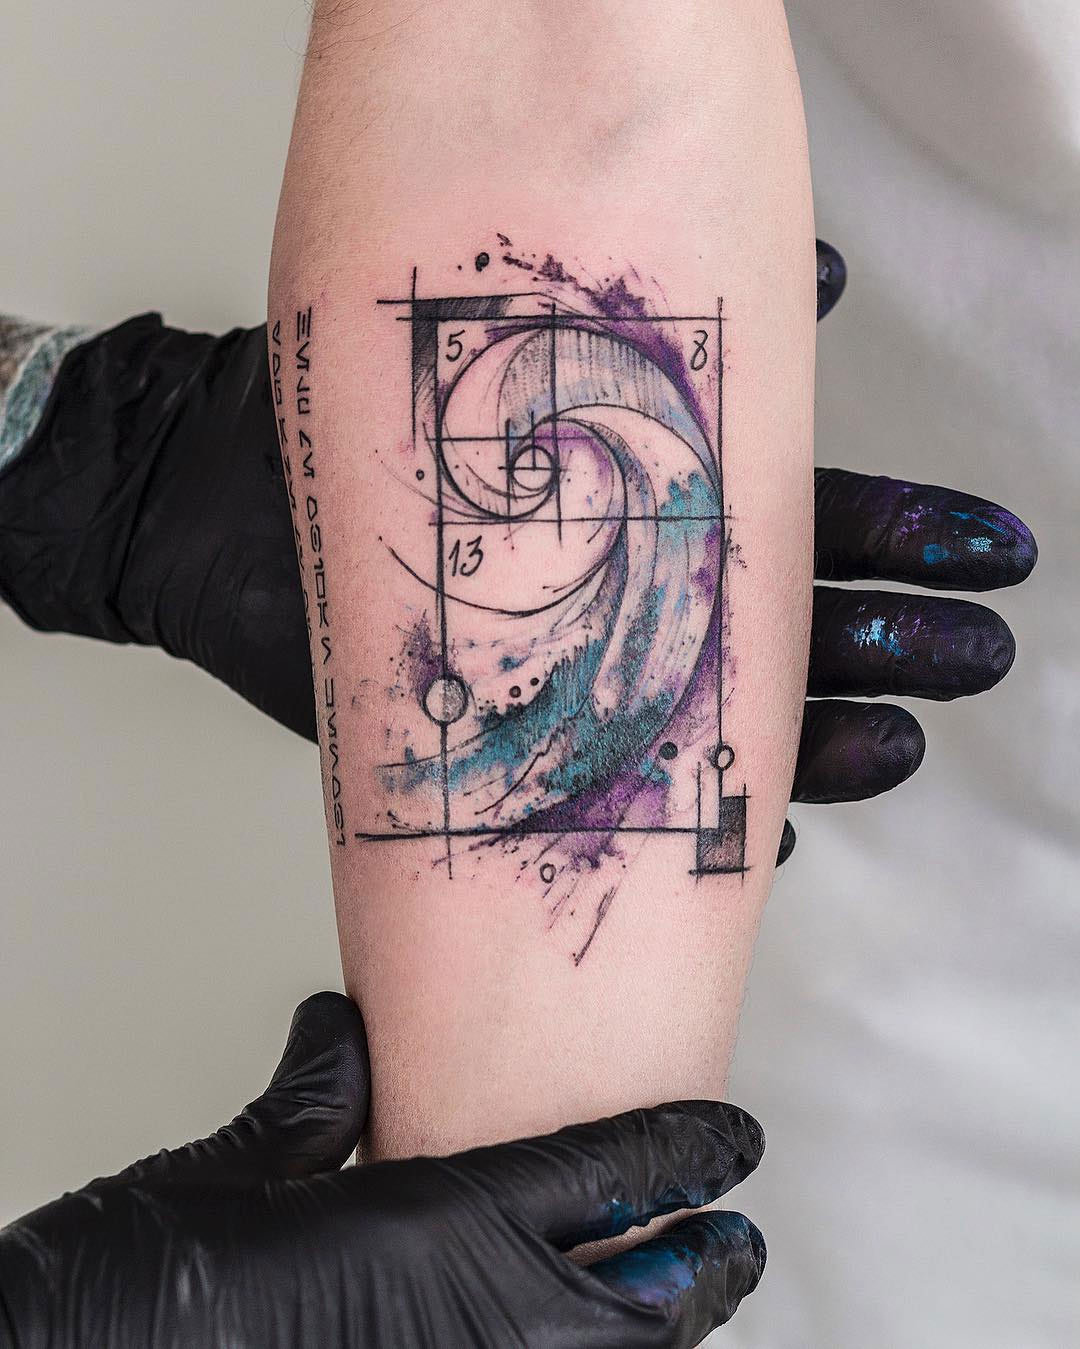 Spiral Tattoo Meaning: Personal Stories and Symbolism Behind Body Art